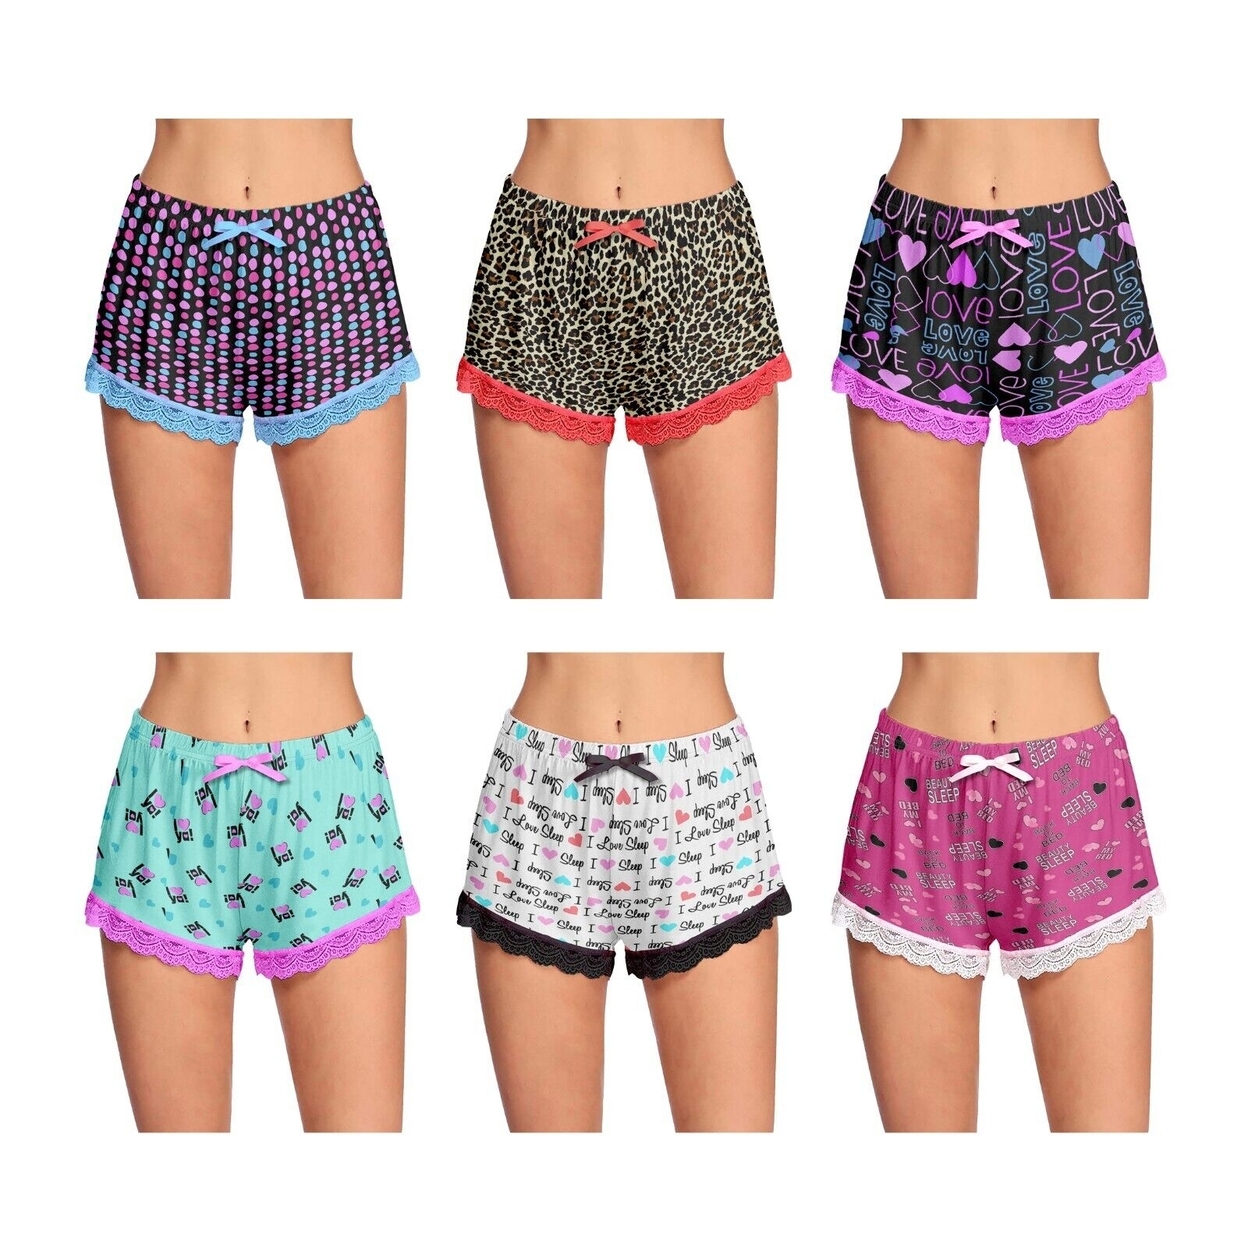 4-Pack: Women's Ultra-Soft Cozy Fun Printed Lace Trim Pajama Lounge Shorts - X-large, Shapes